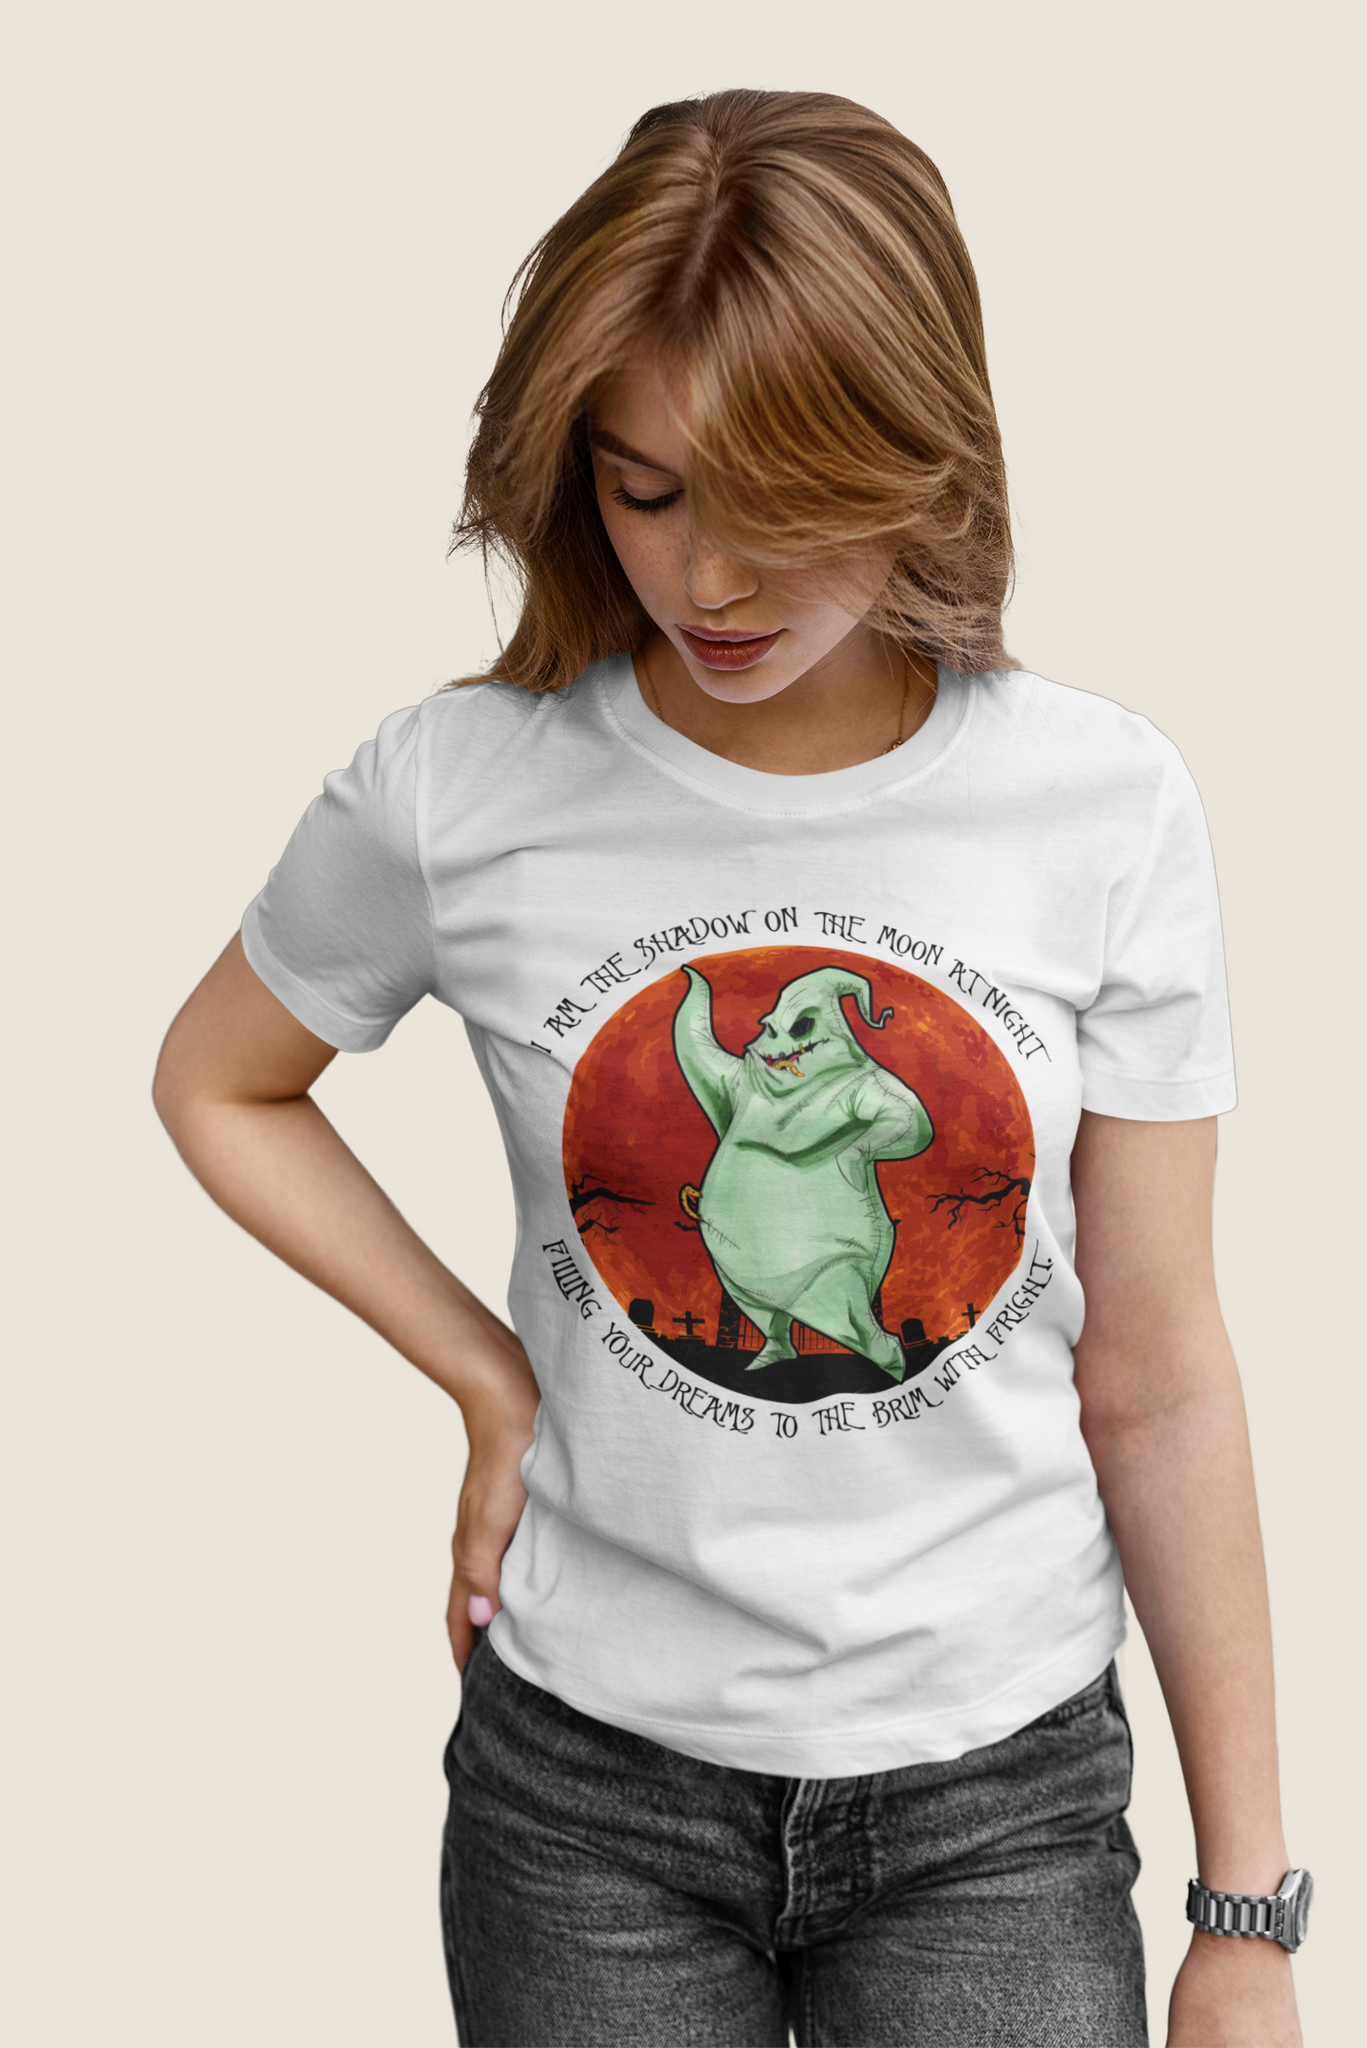 Nightmare Before Christmas T Shirt, I Am The Shadow On The Moon At Night Tshirt, Oogie Boogie T Shirt, Halloween Gifts